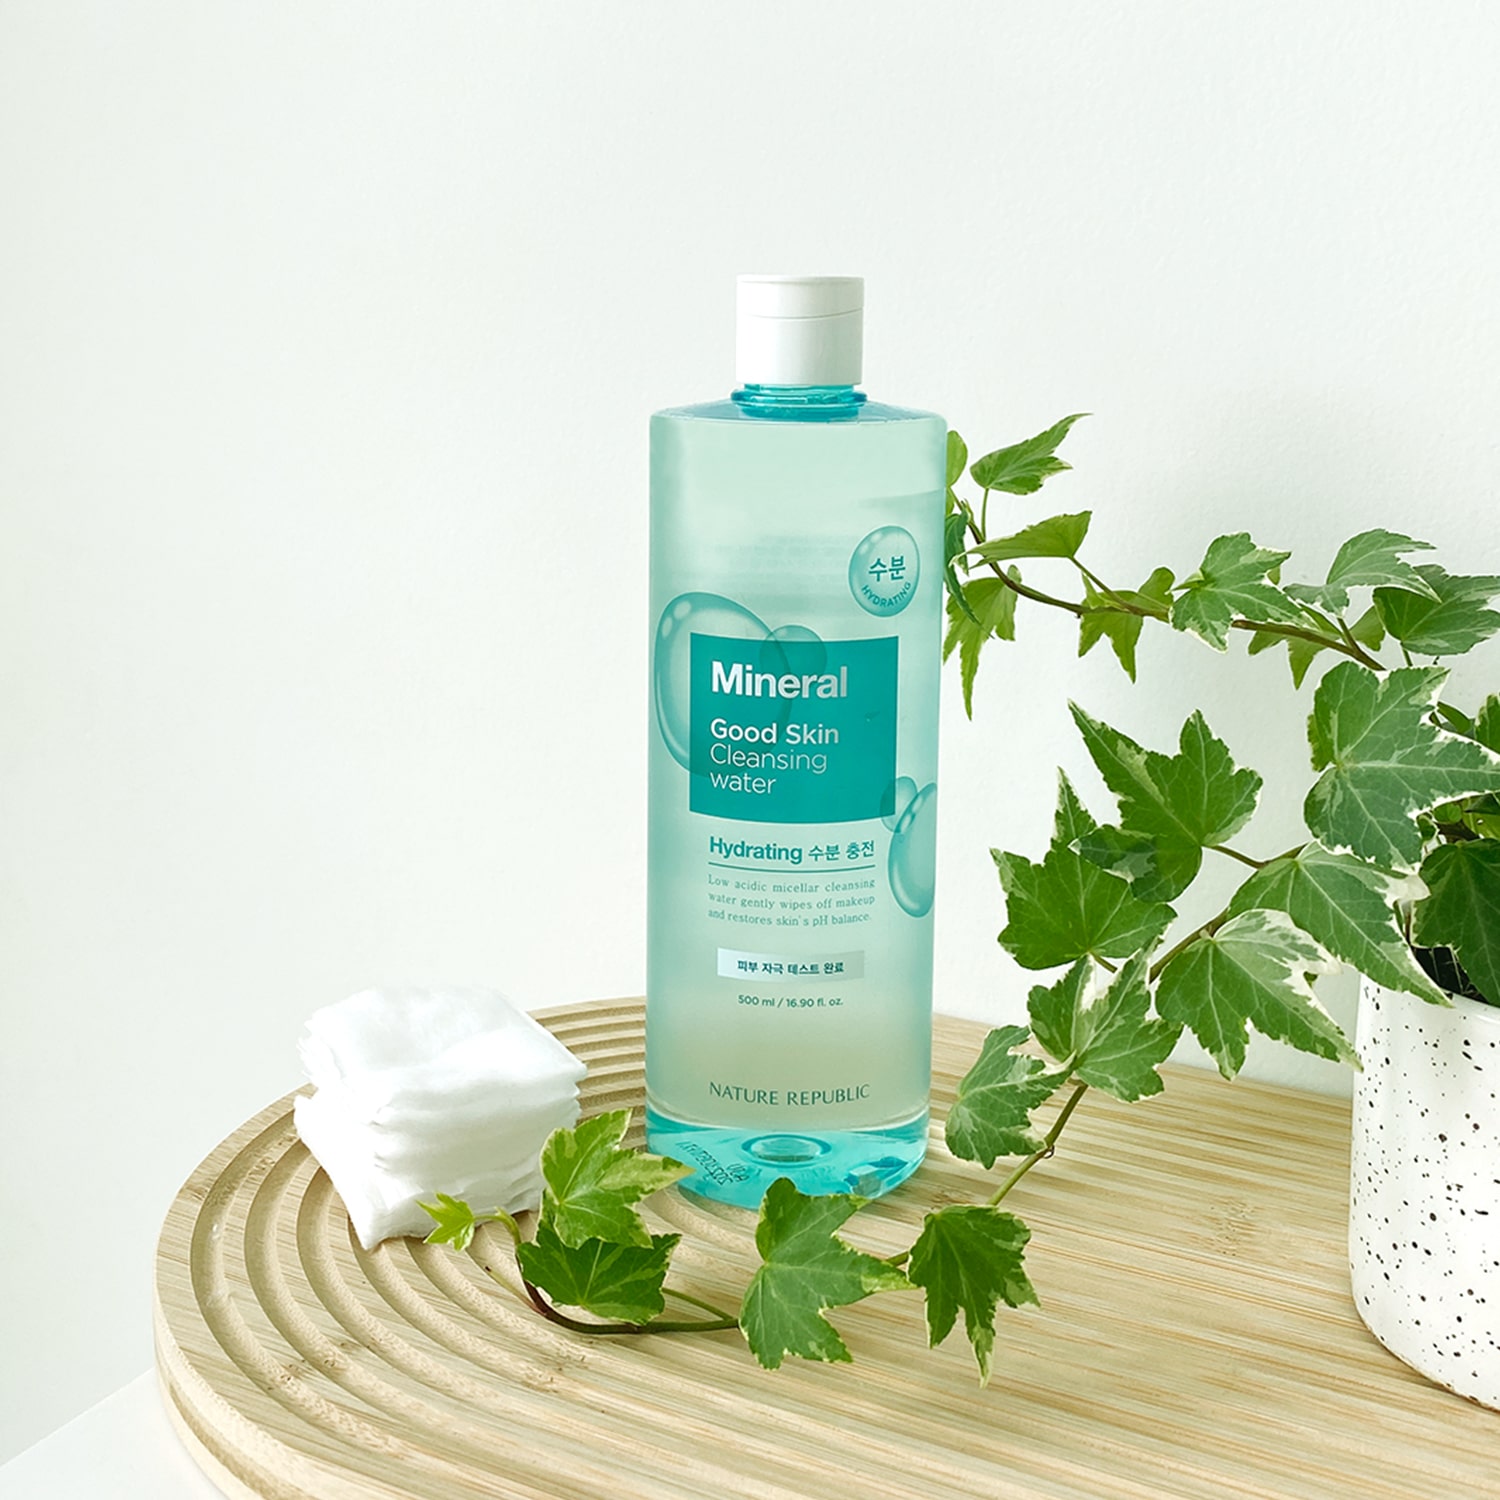 Nature Republic Good Skin Mineral Cleansing Water